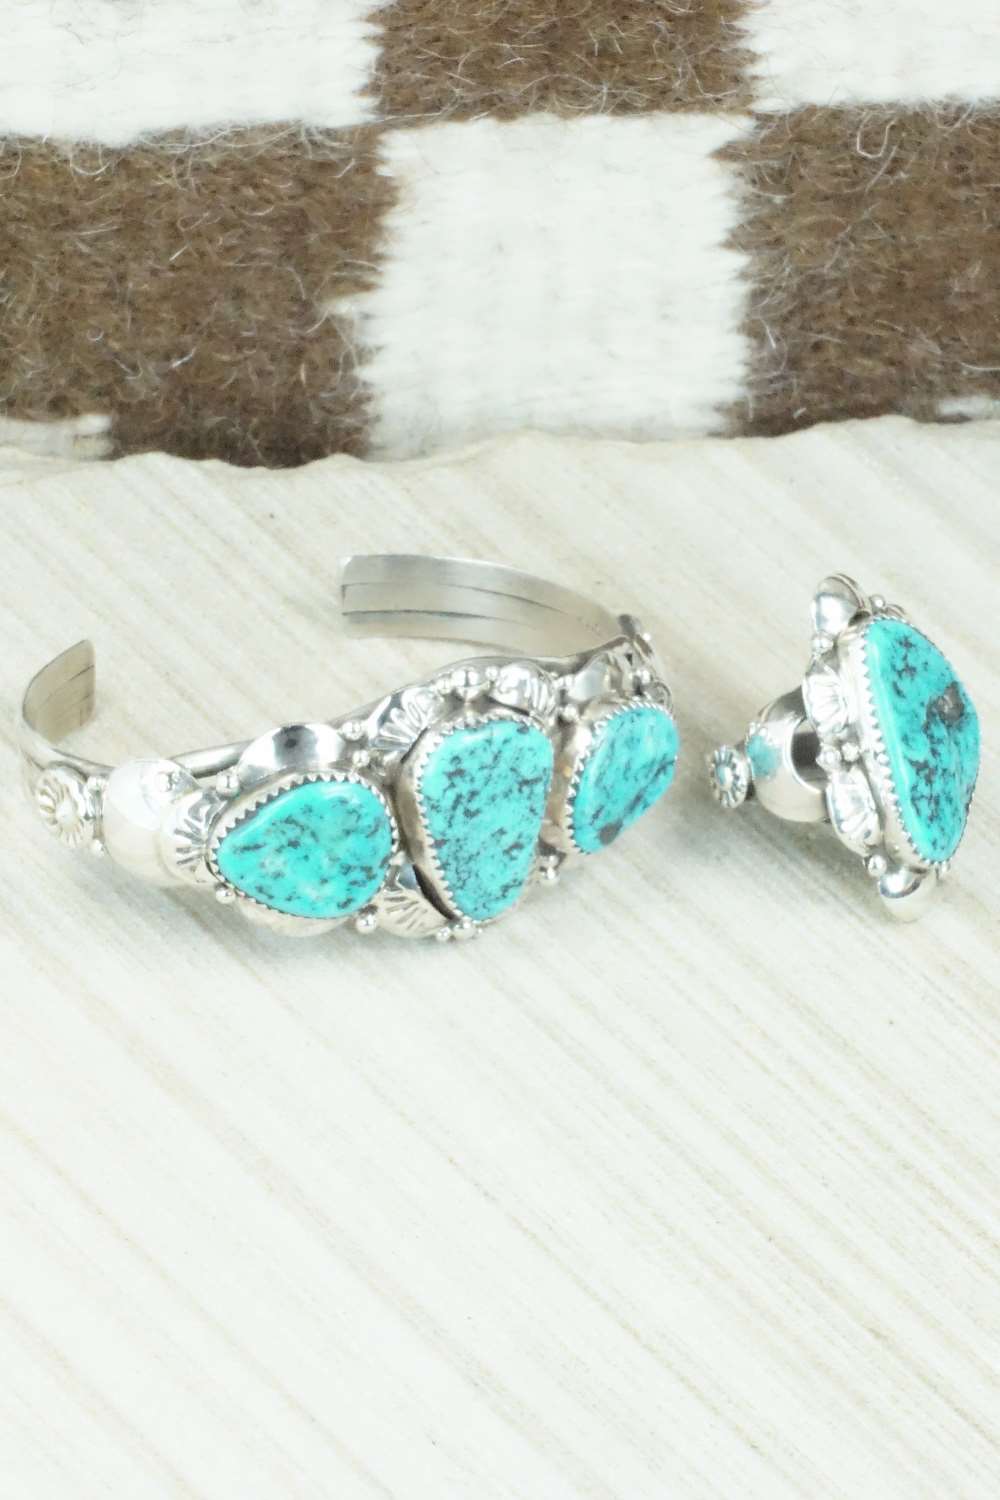 Turquoise and Sterling Silver Bracelet & Ring Set - Clem Nalwood - Size 7